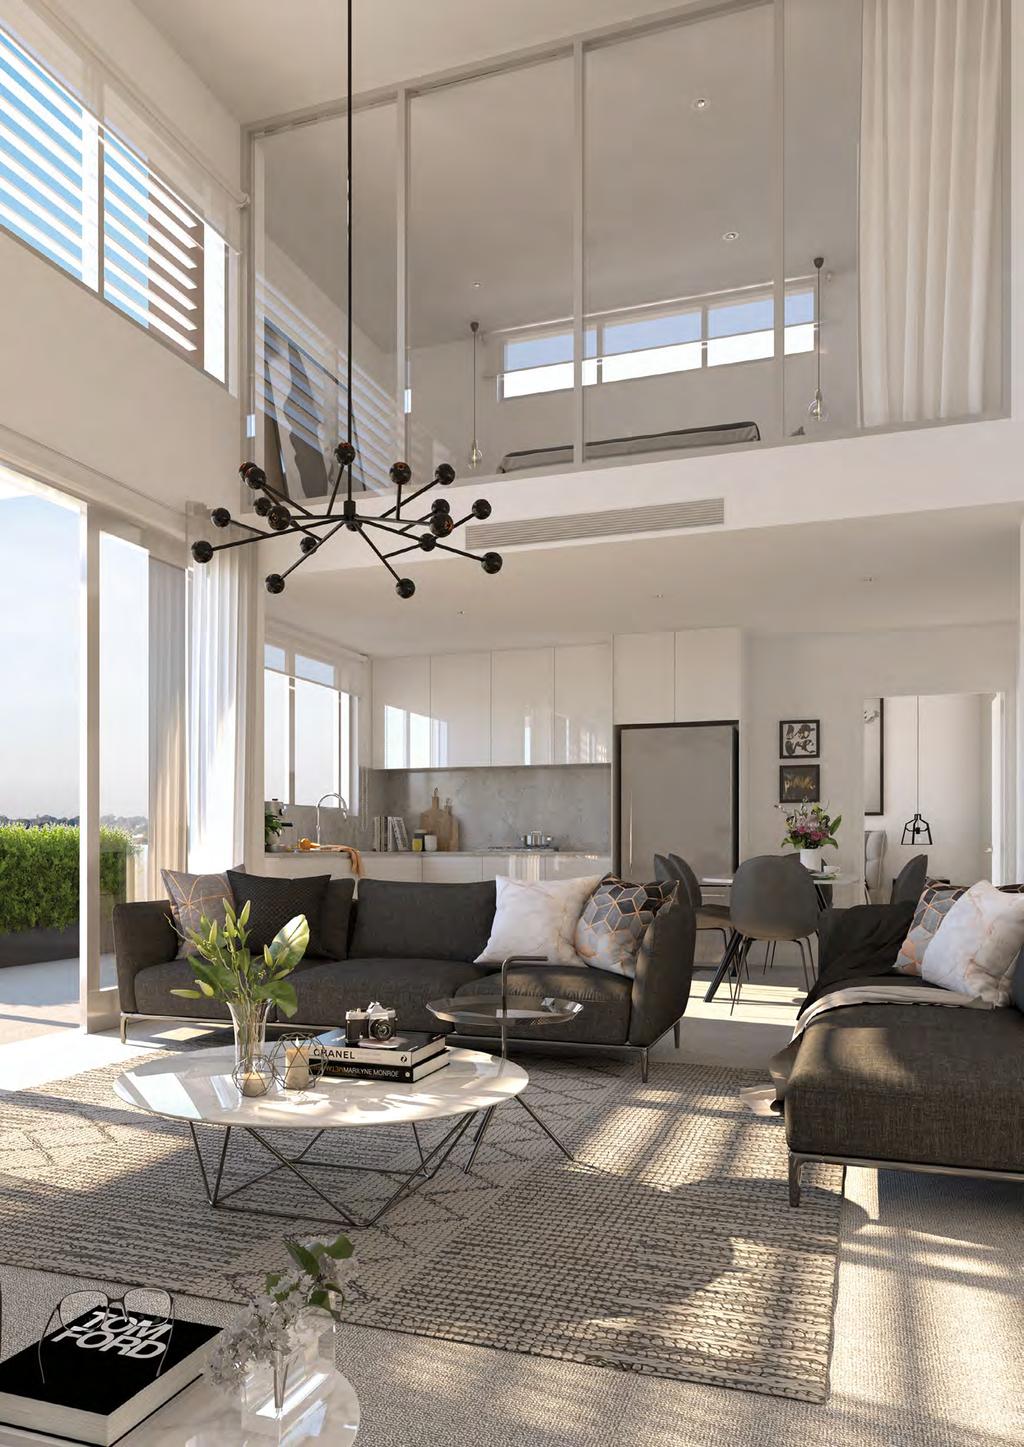 15 An exclusive boutique building With a focus on size, style and sophistication, each residence has been masterfully created to provide individuality as an everyday affair.